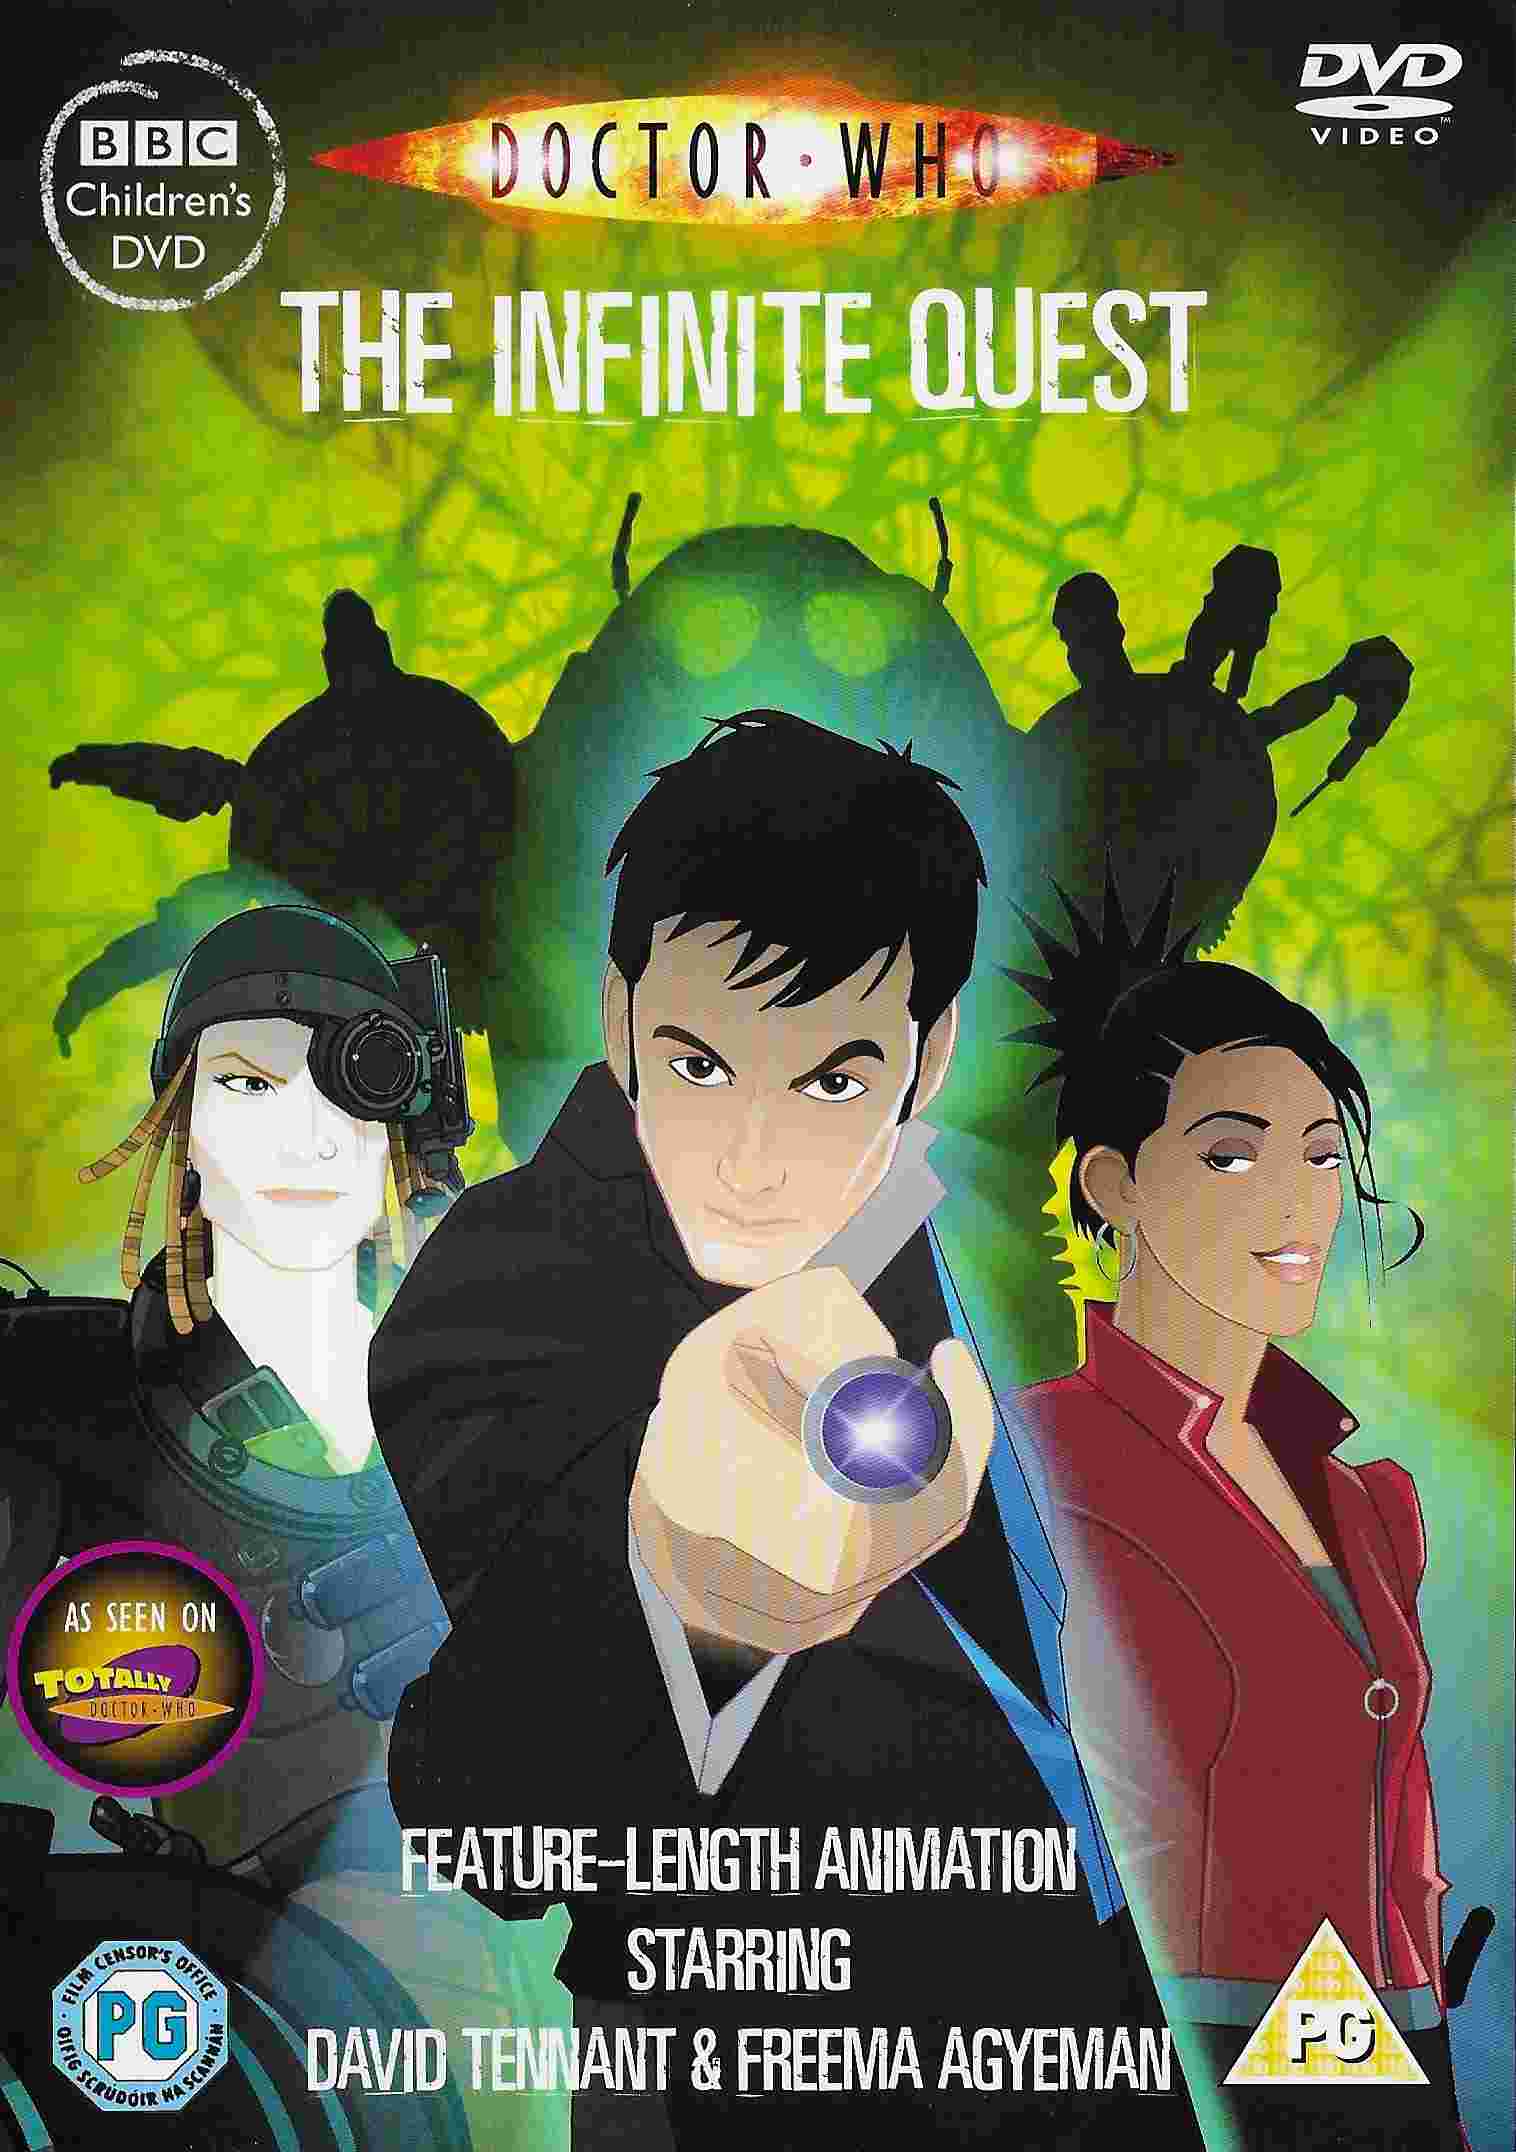 Picture of BBCDVD 2452 Doctor Who - The infinite quest by artist Alan Barnes from the BBC records and Tapes library